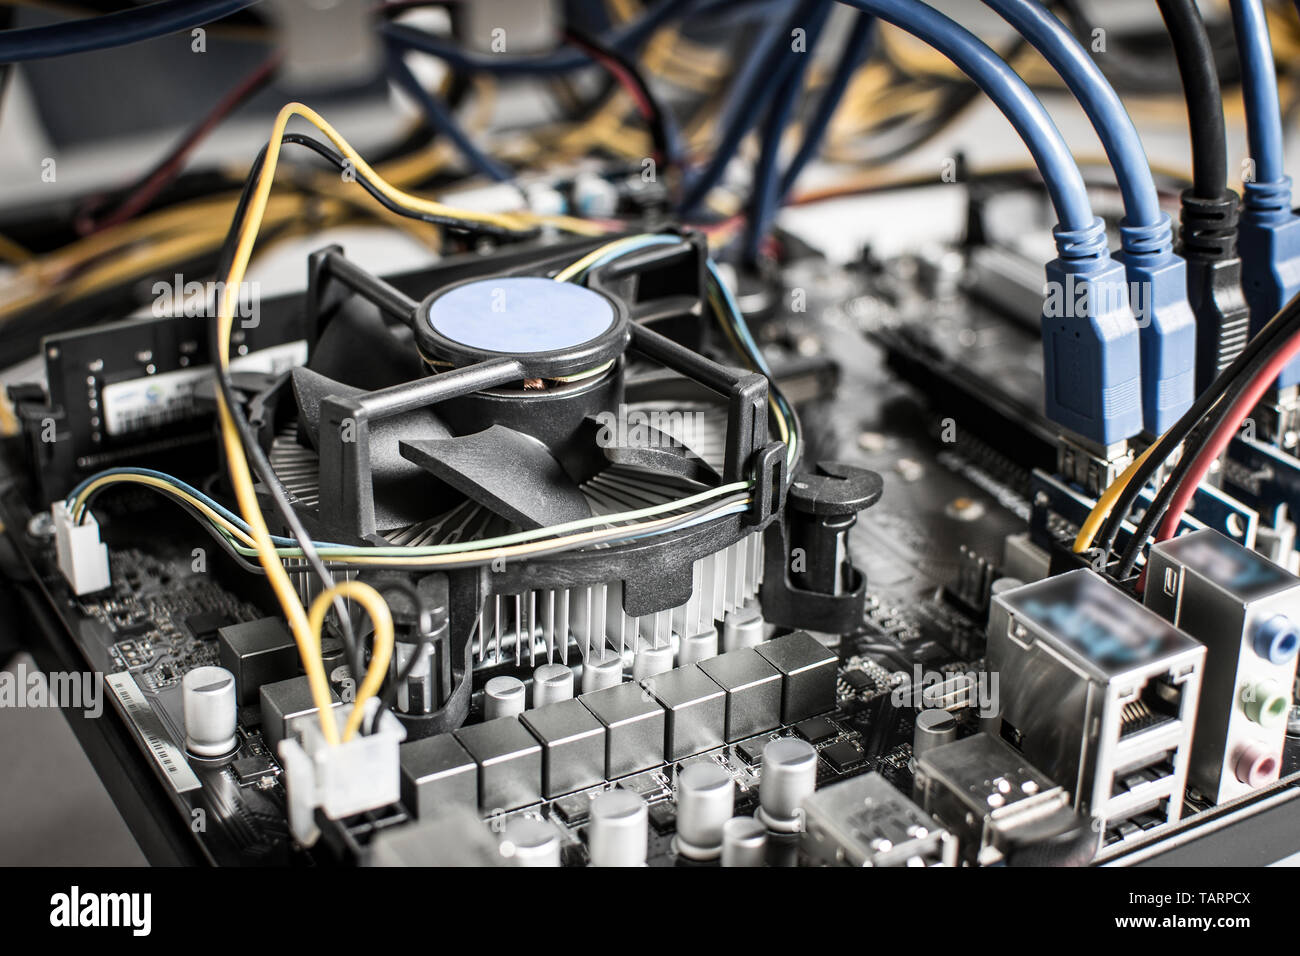 Cryptocurrency Mining Rig Connectors on Motherboard for Graphic Cards Stock Photo